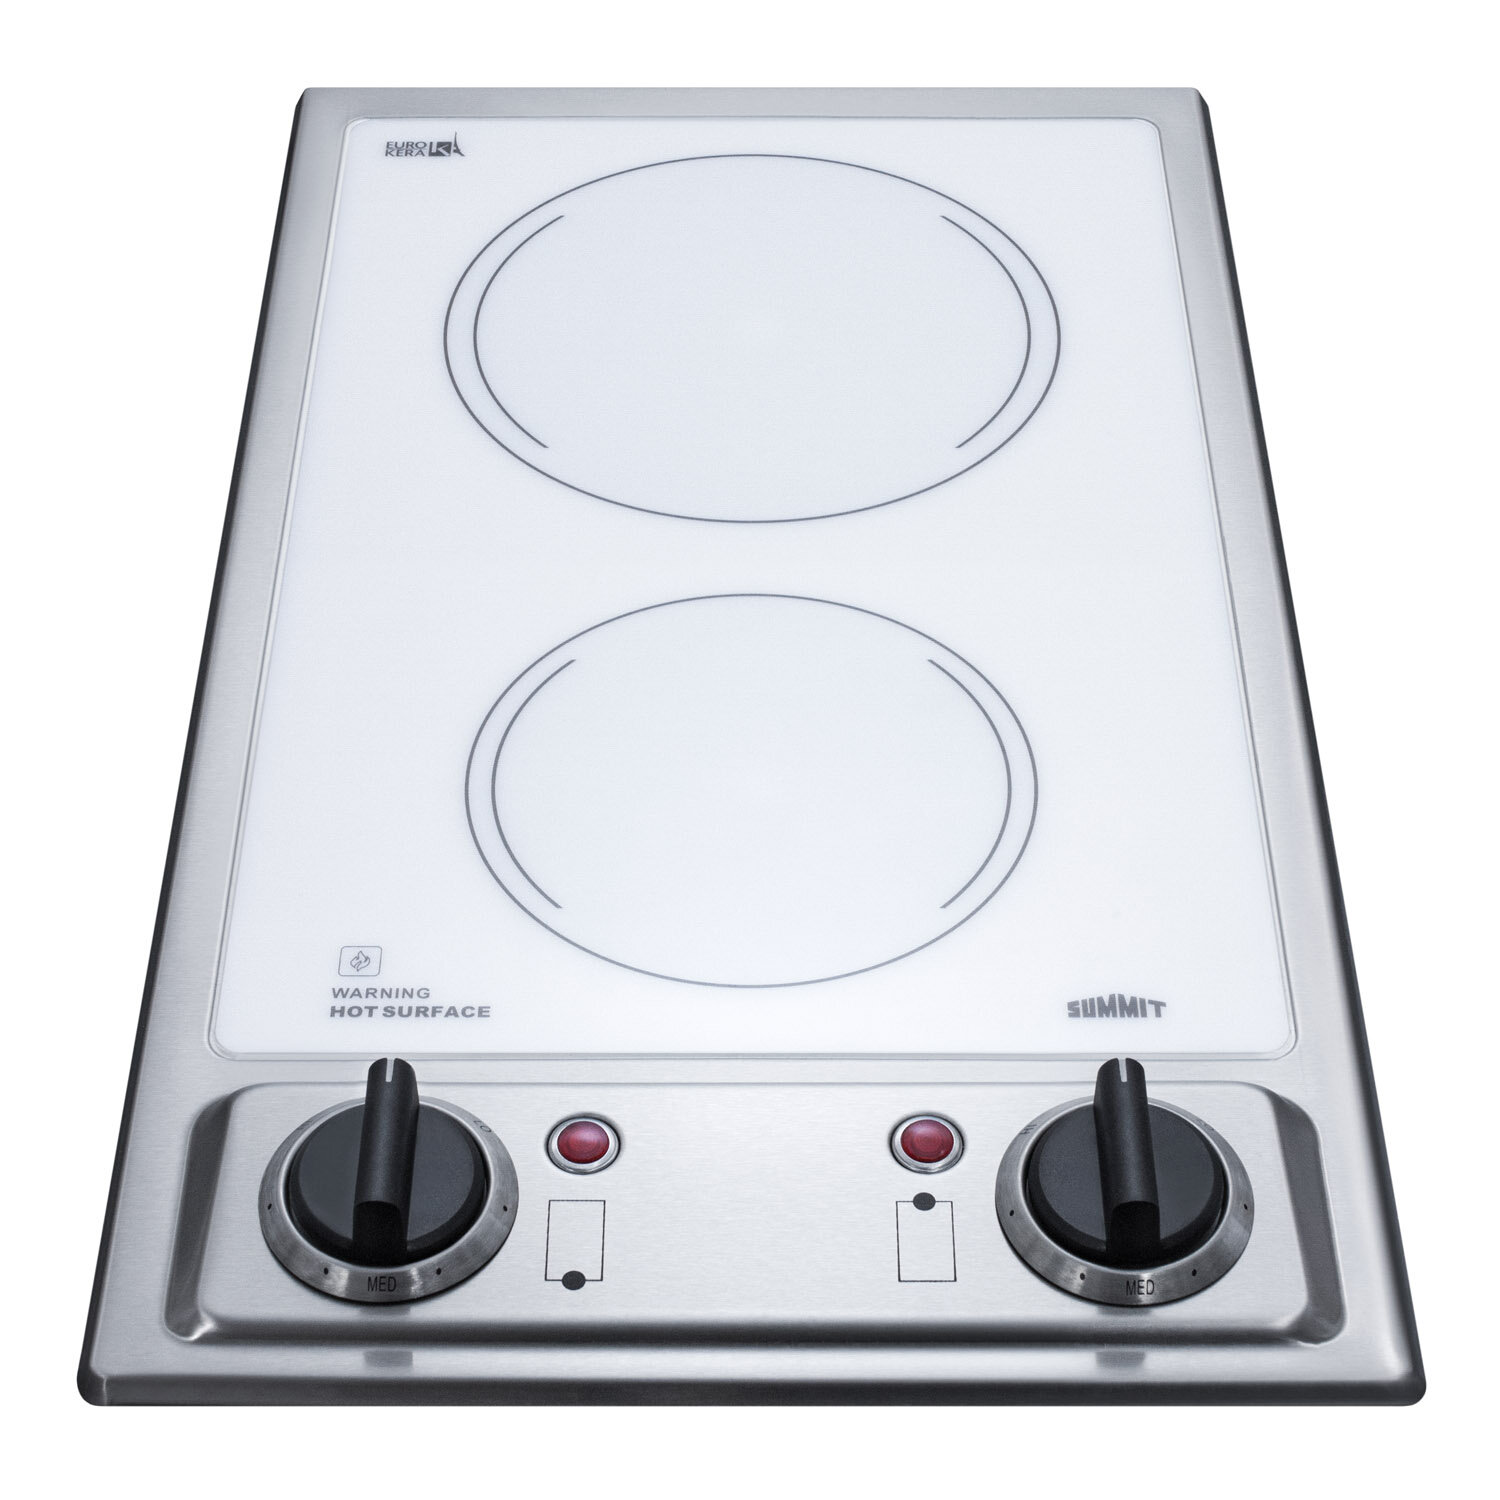 12 Inch Radiant Cooktop With Stainless Steel Electric Cooktop ECOTOUCH 2 Burner Electric Cooktop 120V Stove Top Built In Plug In